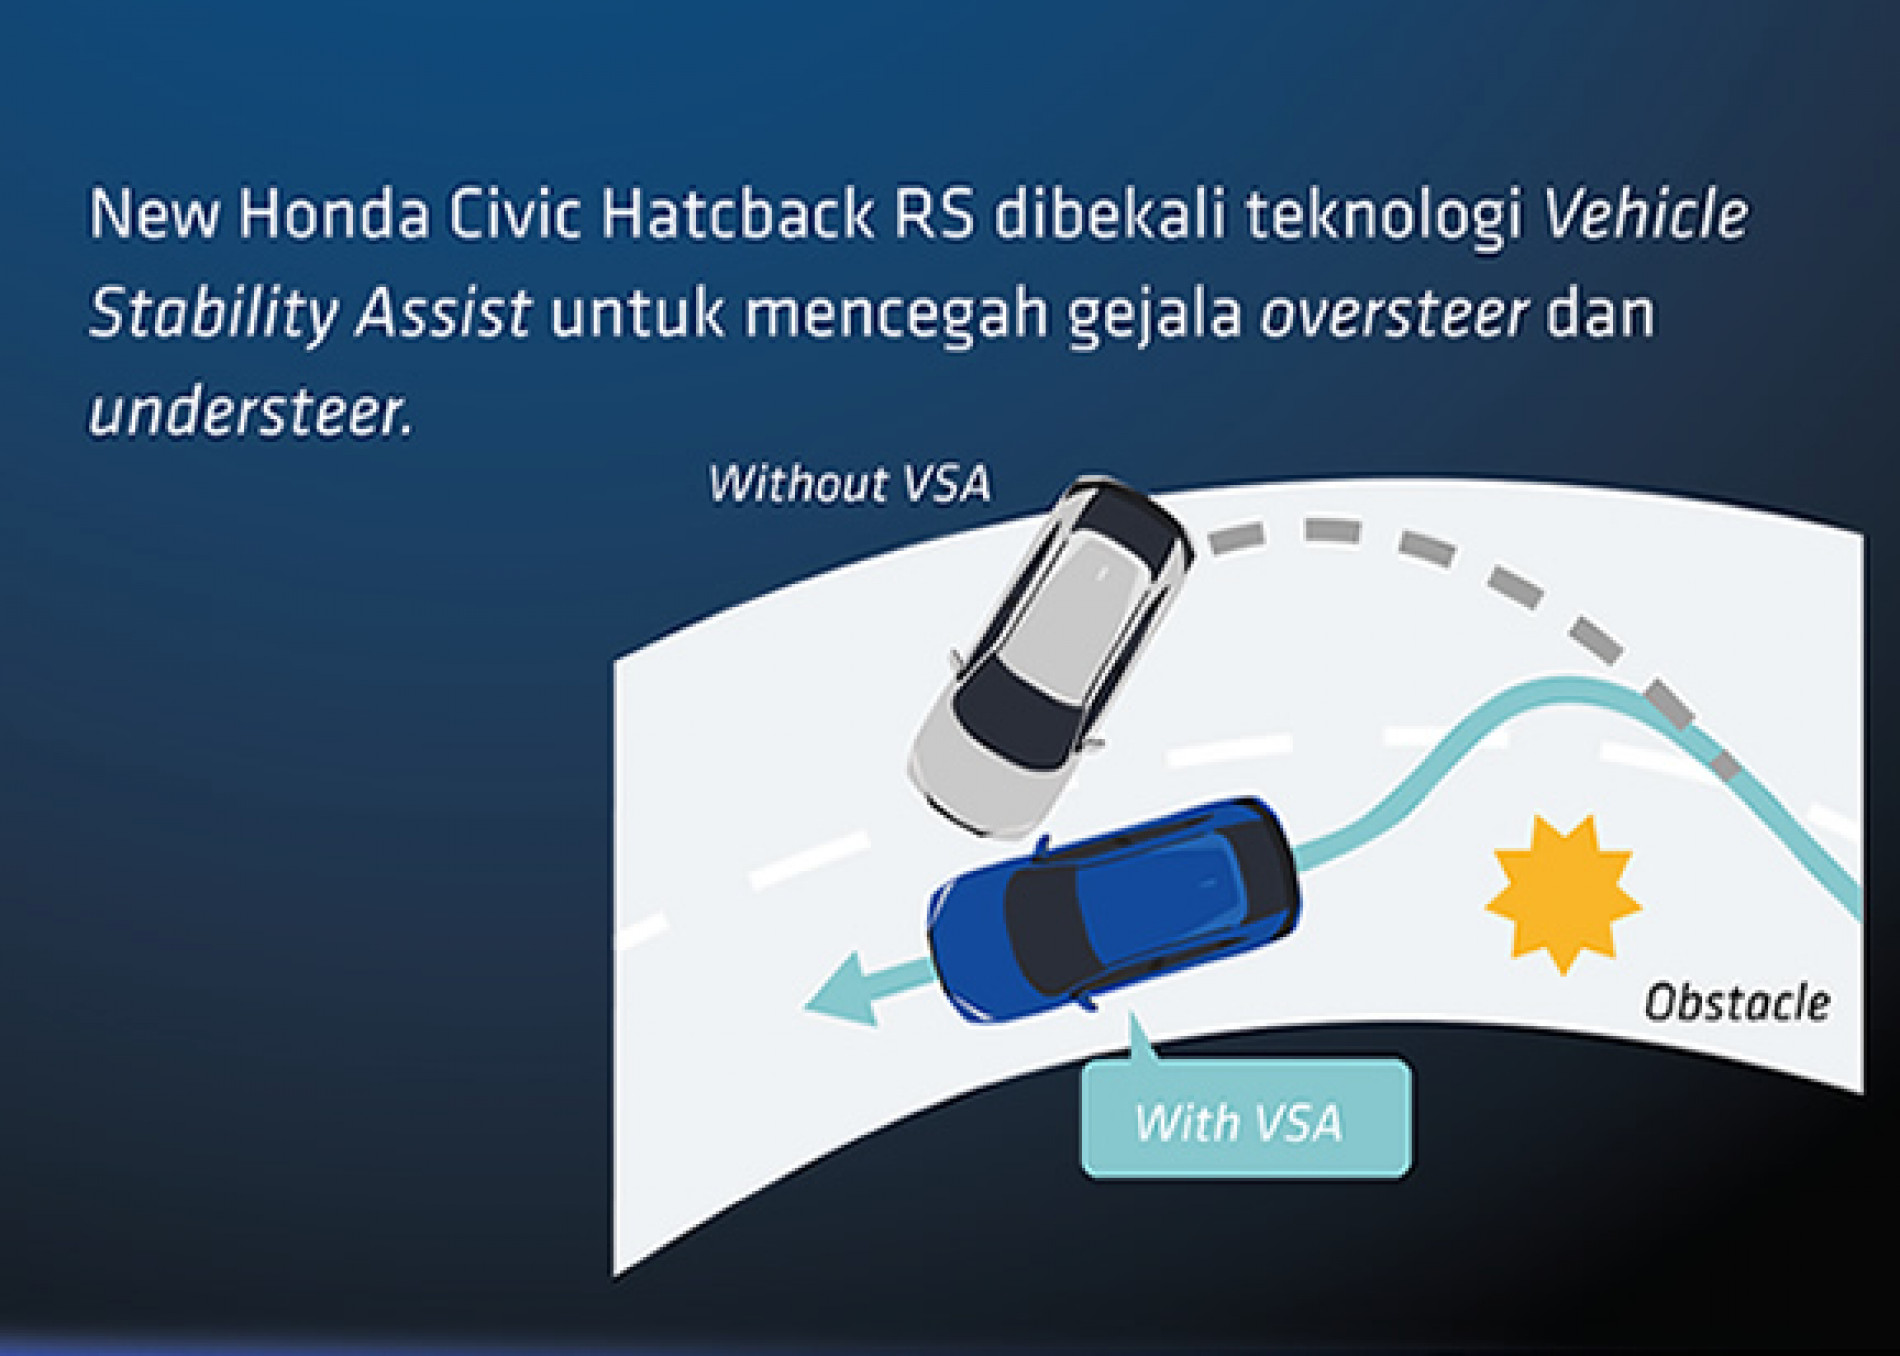 VEHICLE-STABILITY-ASSIST-VSA